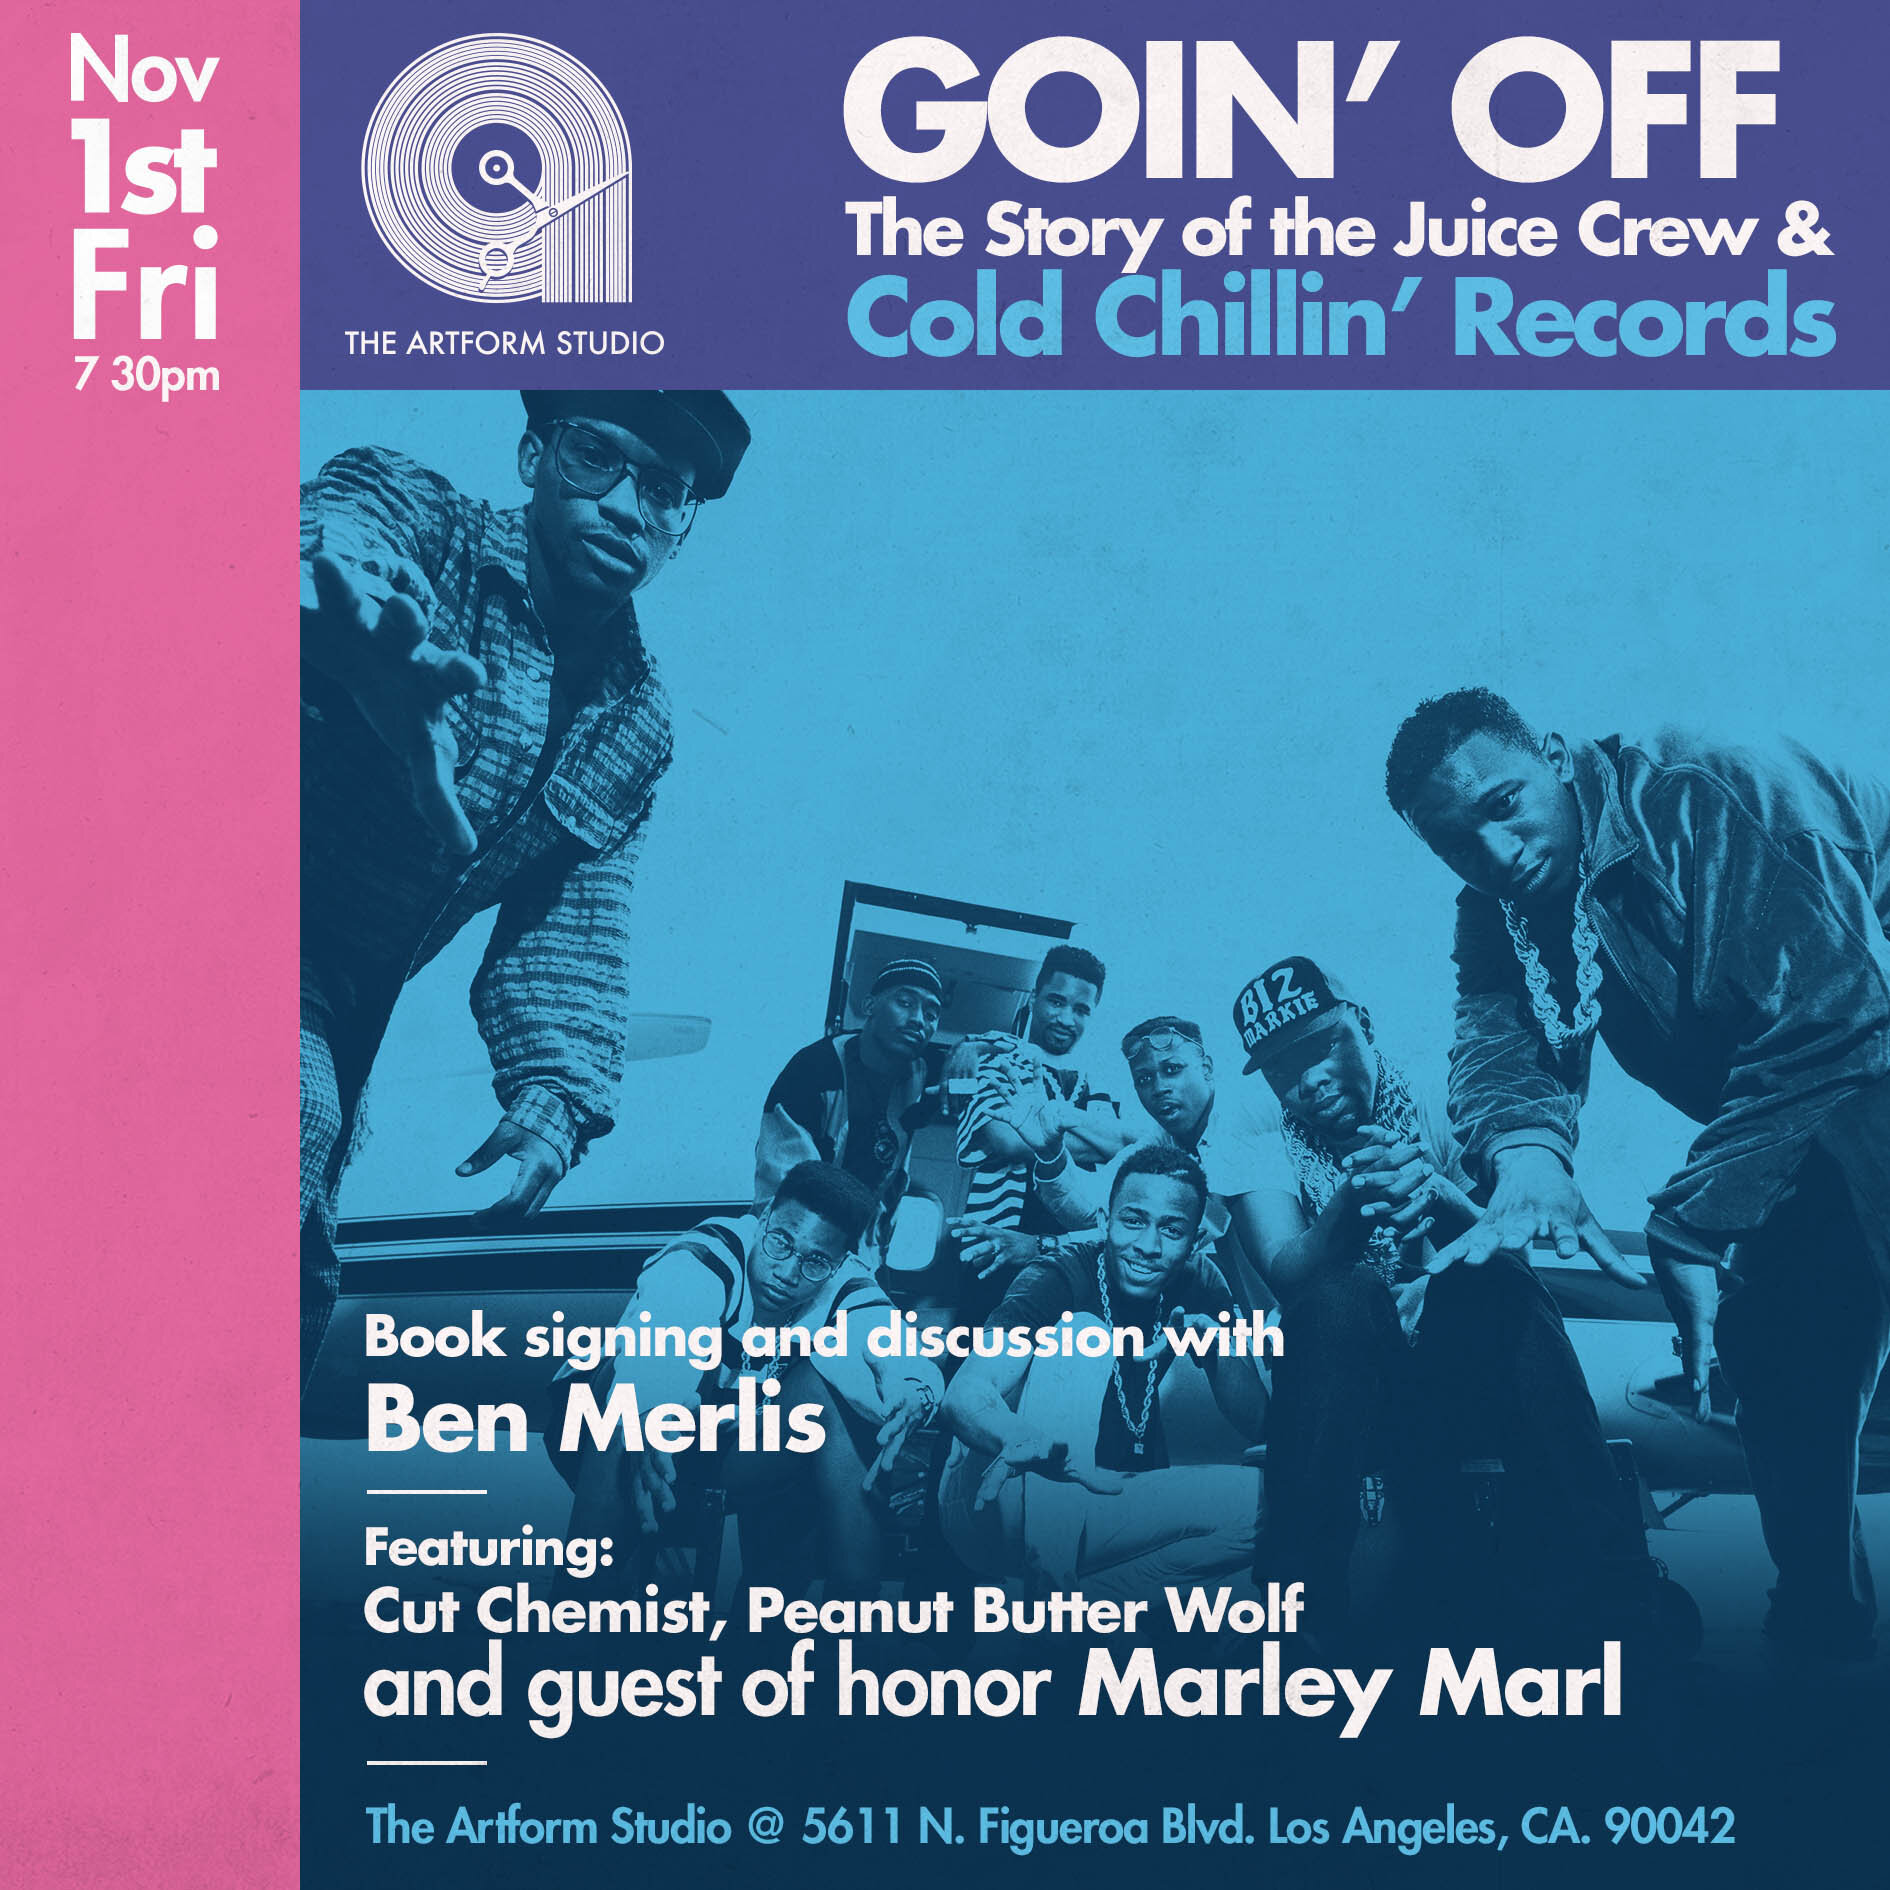 GOIN' OFF: The Story of The Juice Crew & Cold Chillin' Records